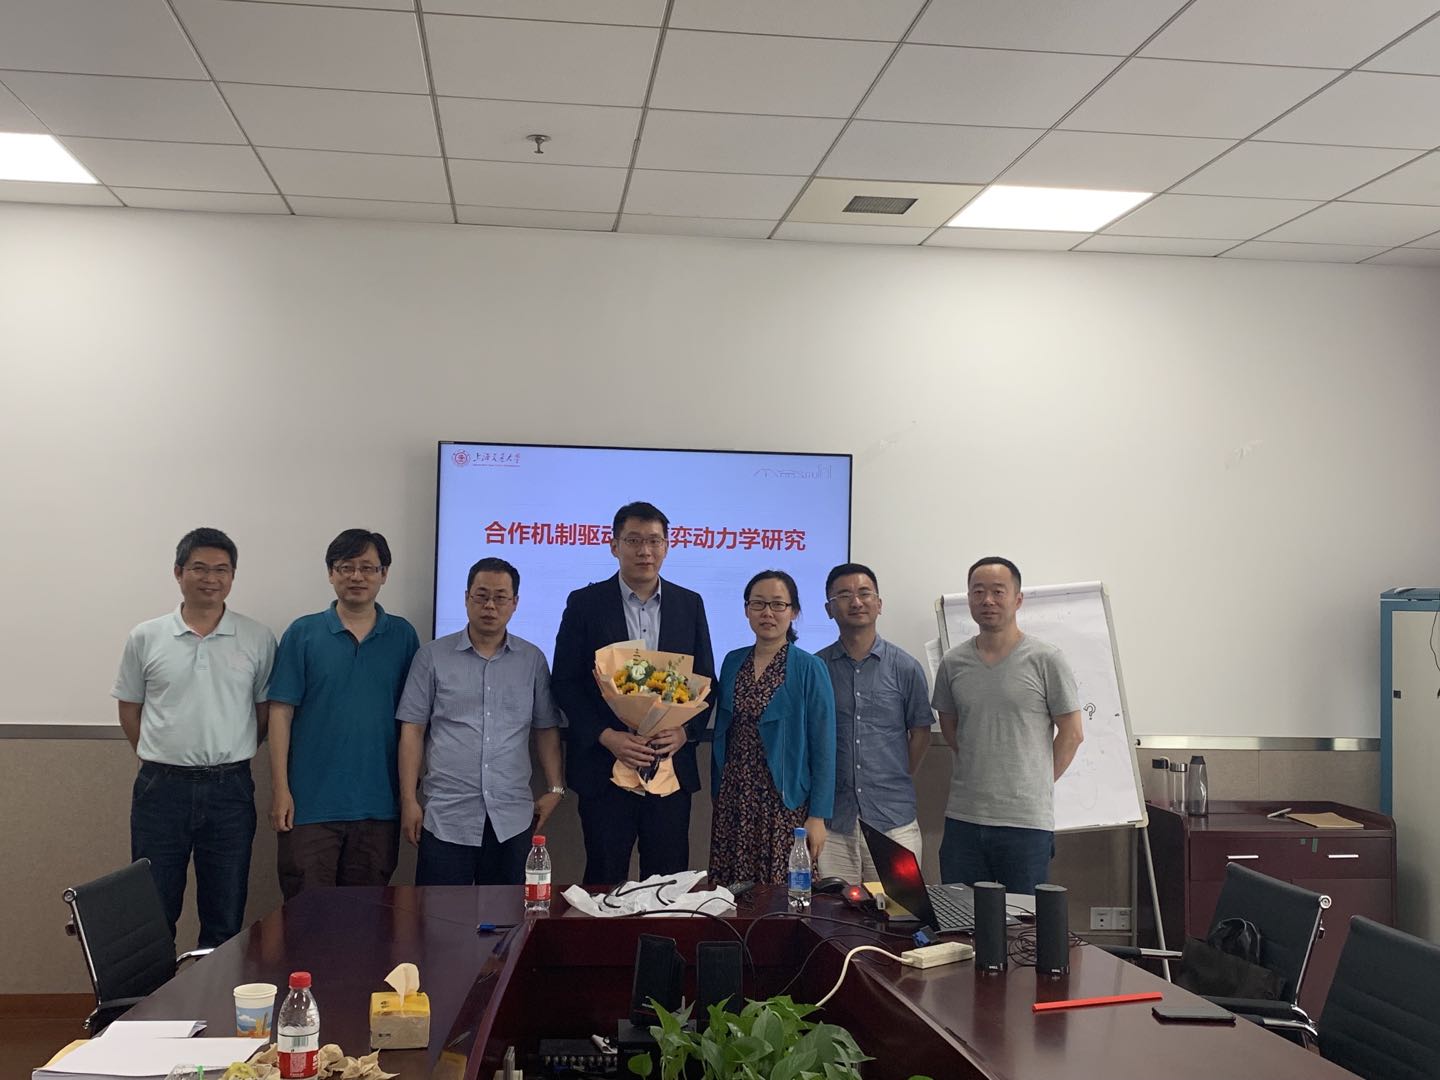 Deng Chuang passed the thesis defense for PHD successfully.